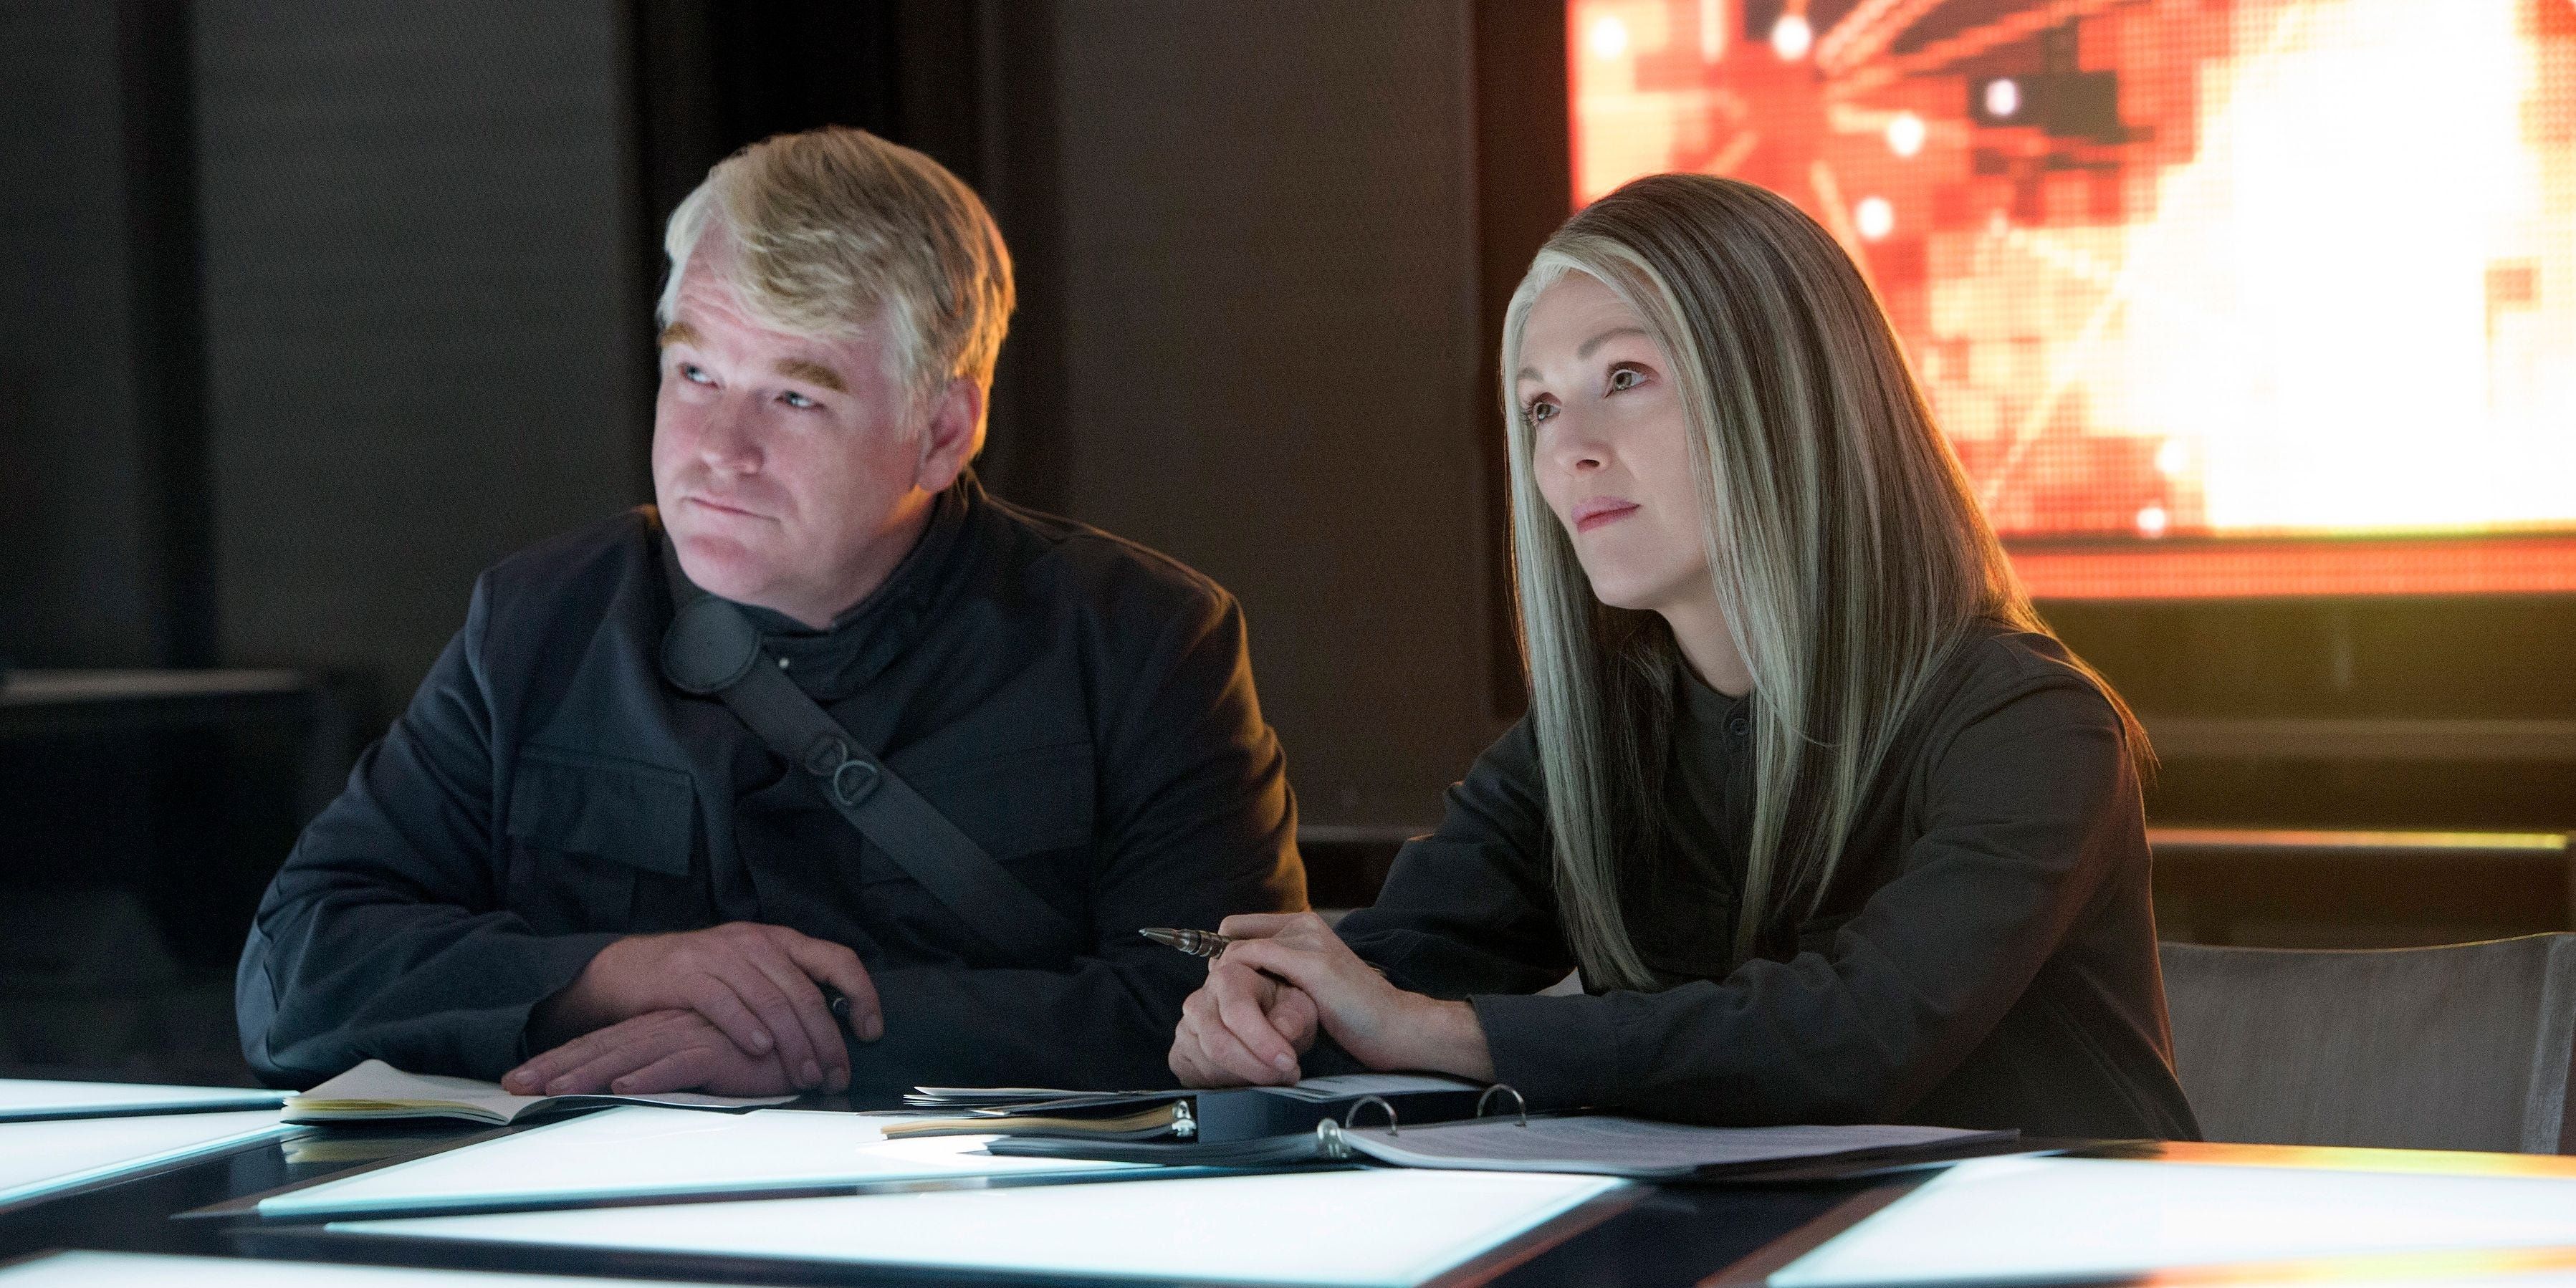 Plutarch Heavensbee and Alma Coin sitting behind a desk and looking intently in The Hunger Games Mockingjay.